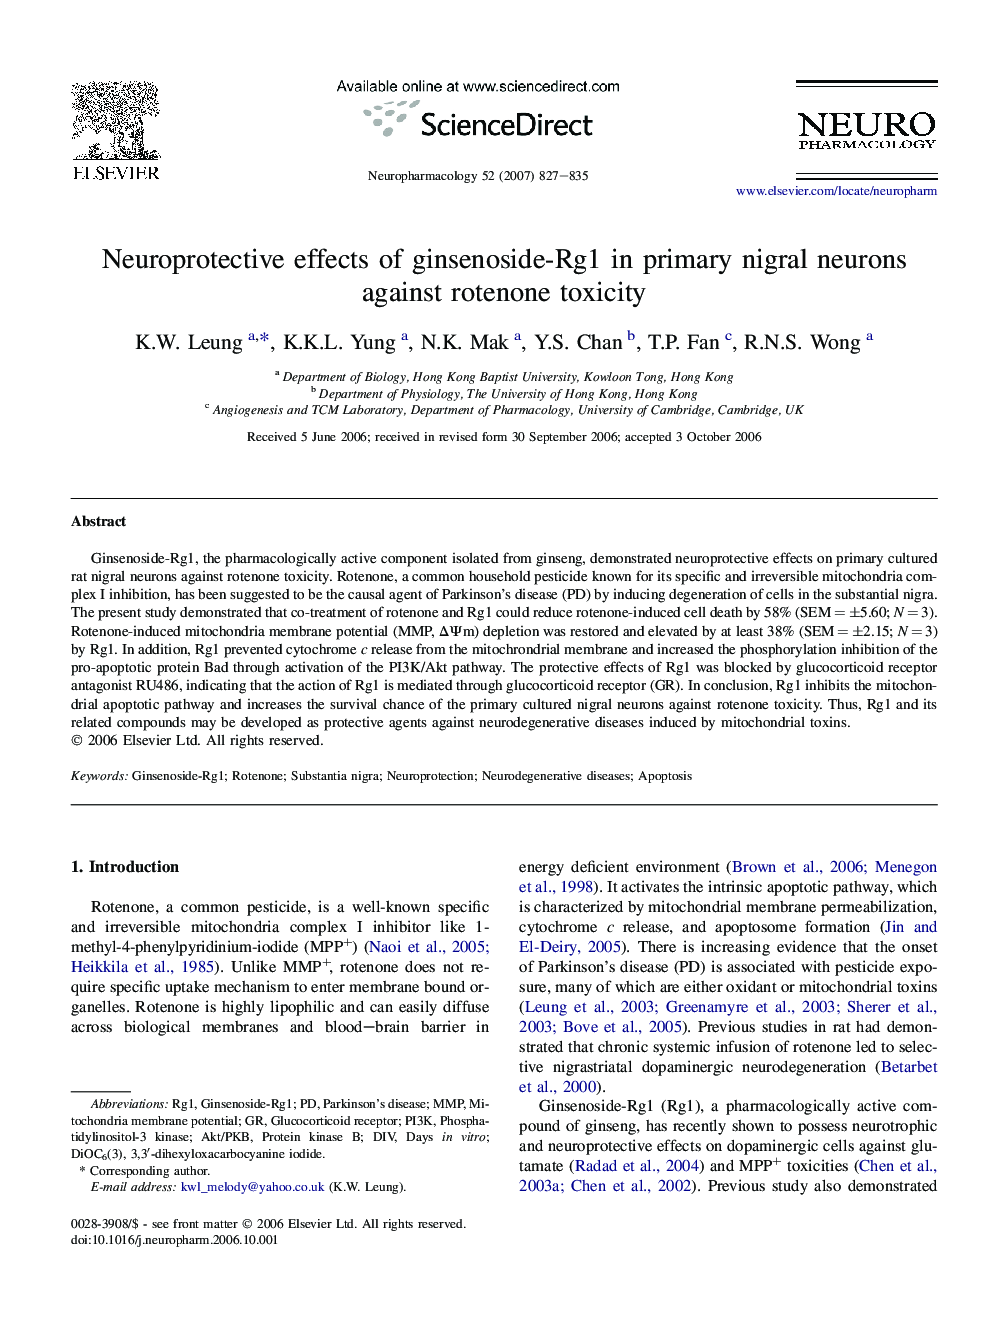 Neuroprotective effects of ginsenoside-Rg1 in primary nigral neurons against rotenone toxicity